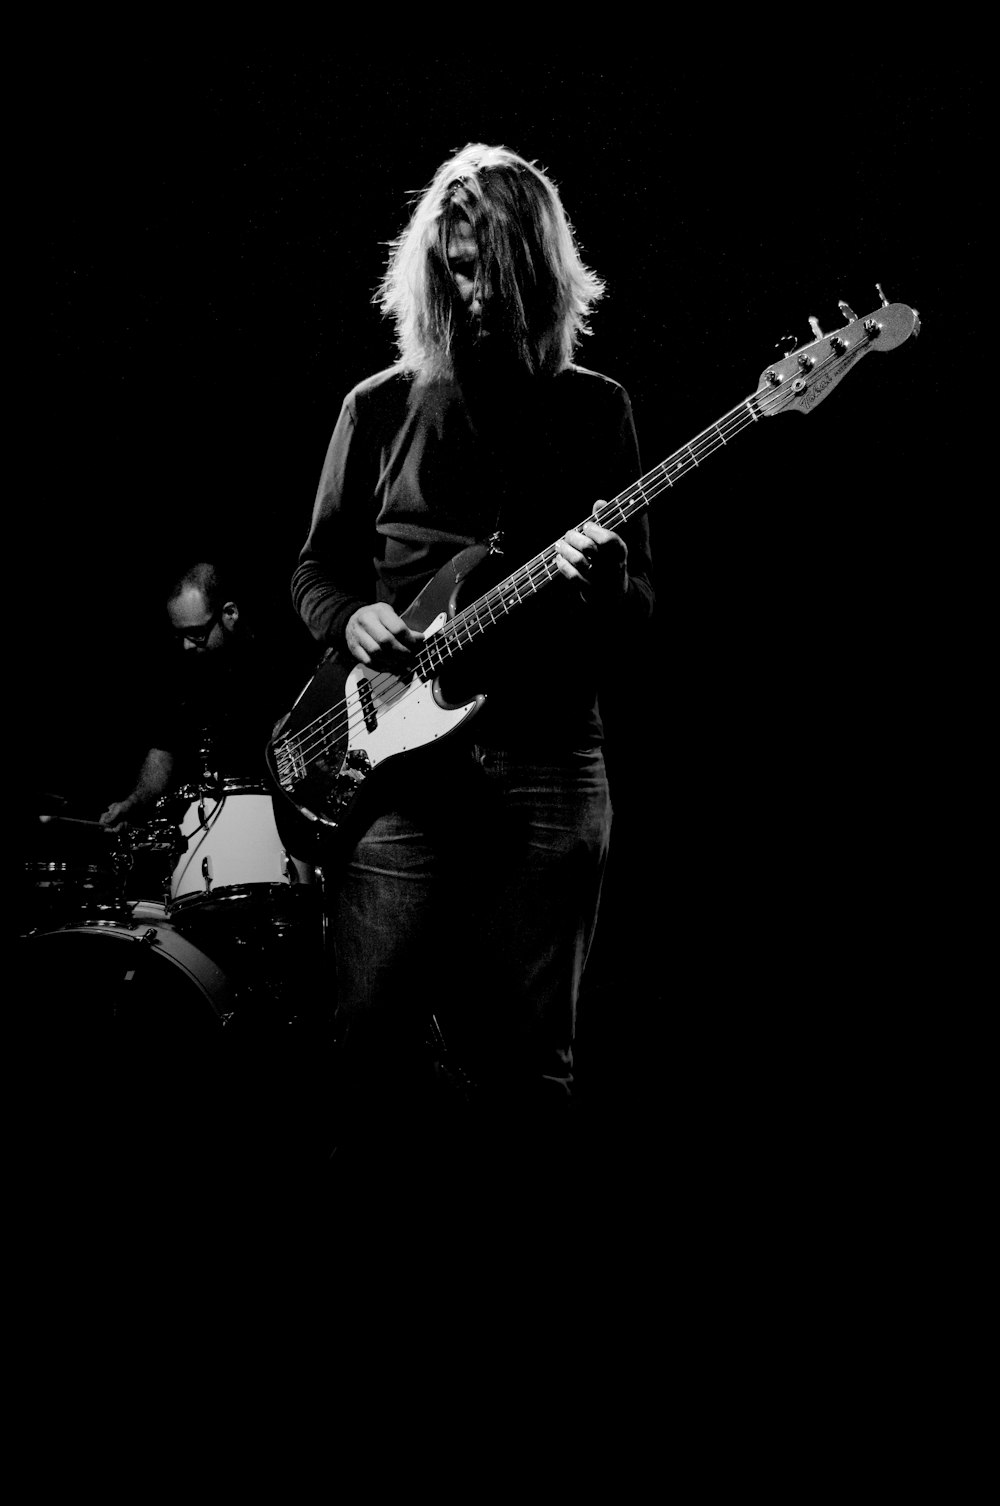 man playing electric bass guitar in grayscale photography